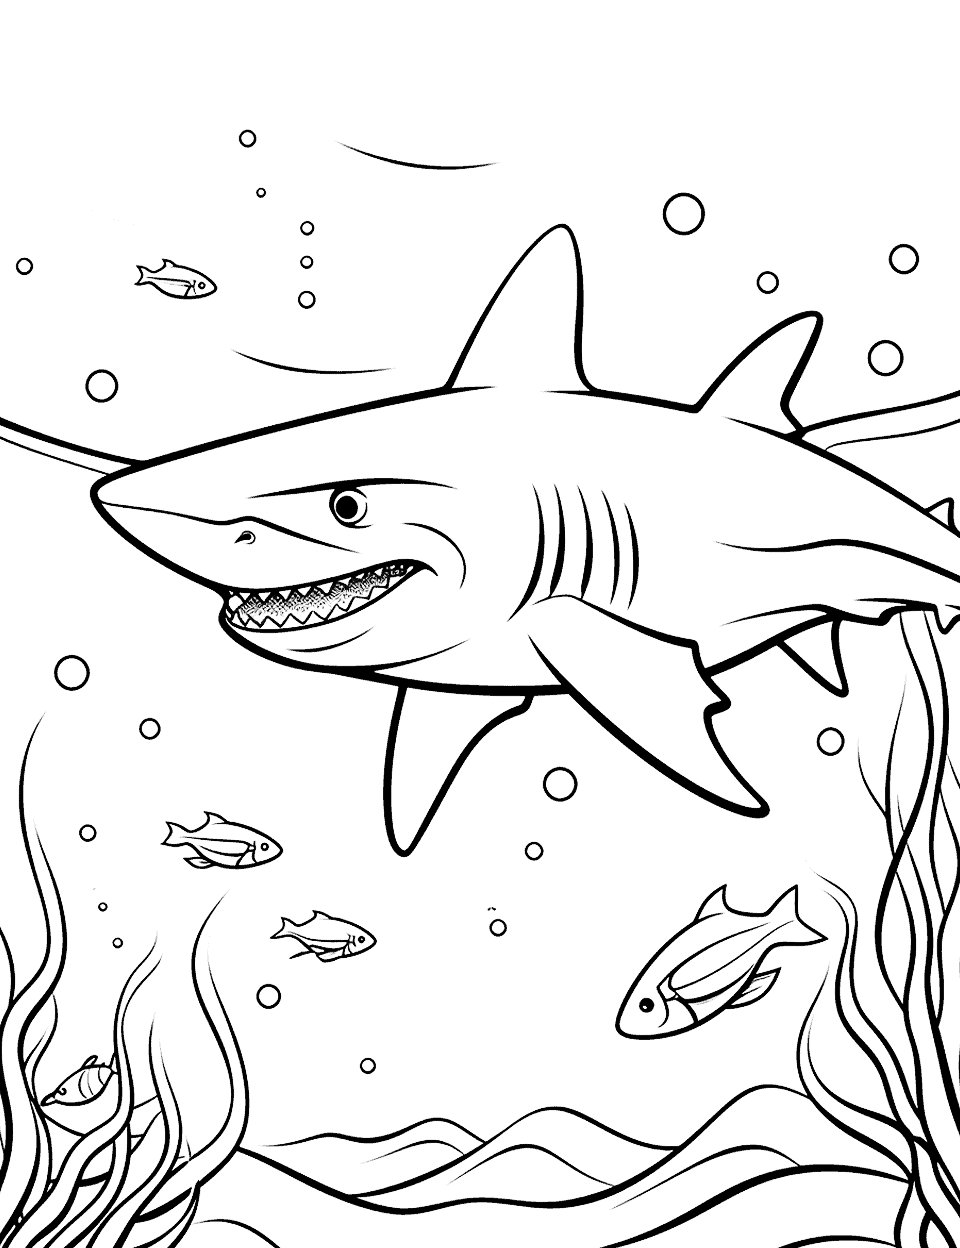 Black Tip Shark in Action Coloring Page - A dynamic scene of a black tip shark swiftly swimming through the ocean.